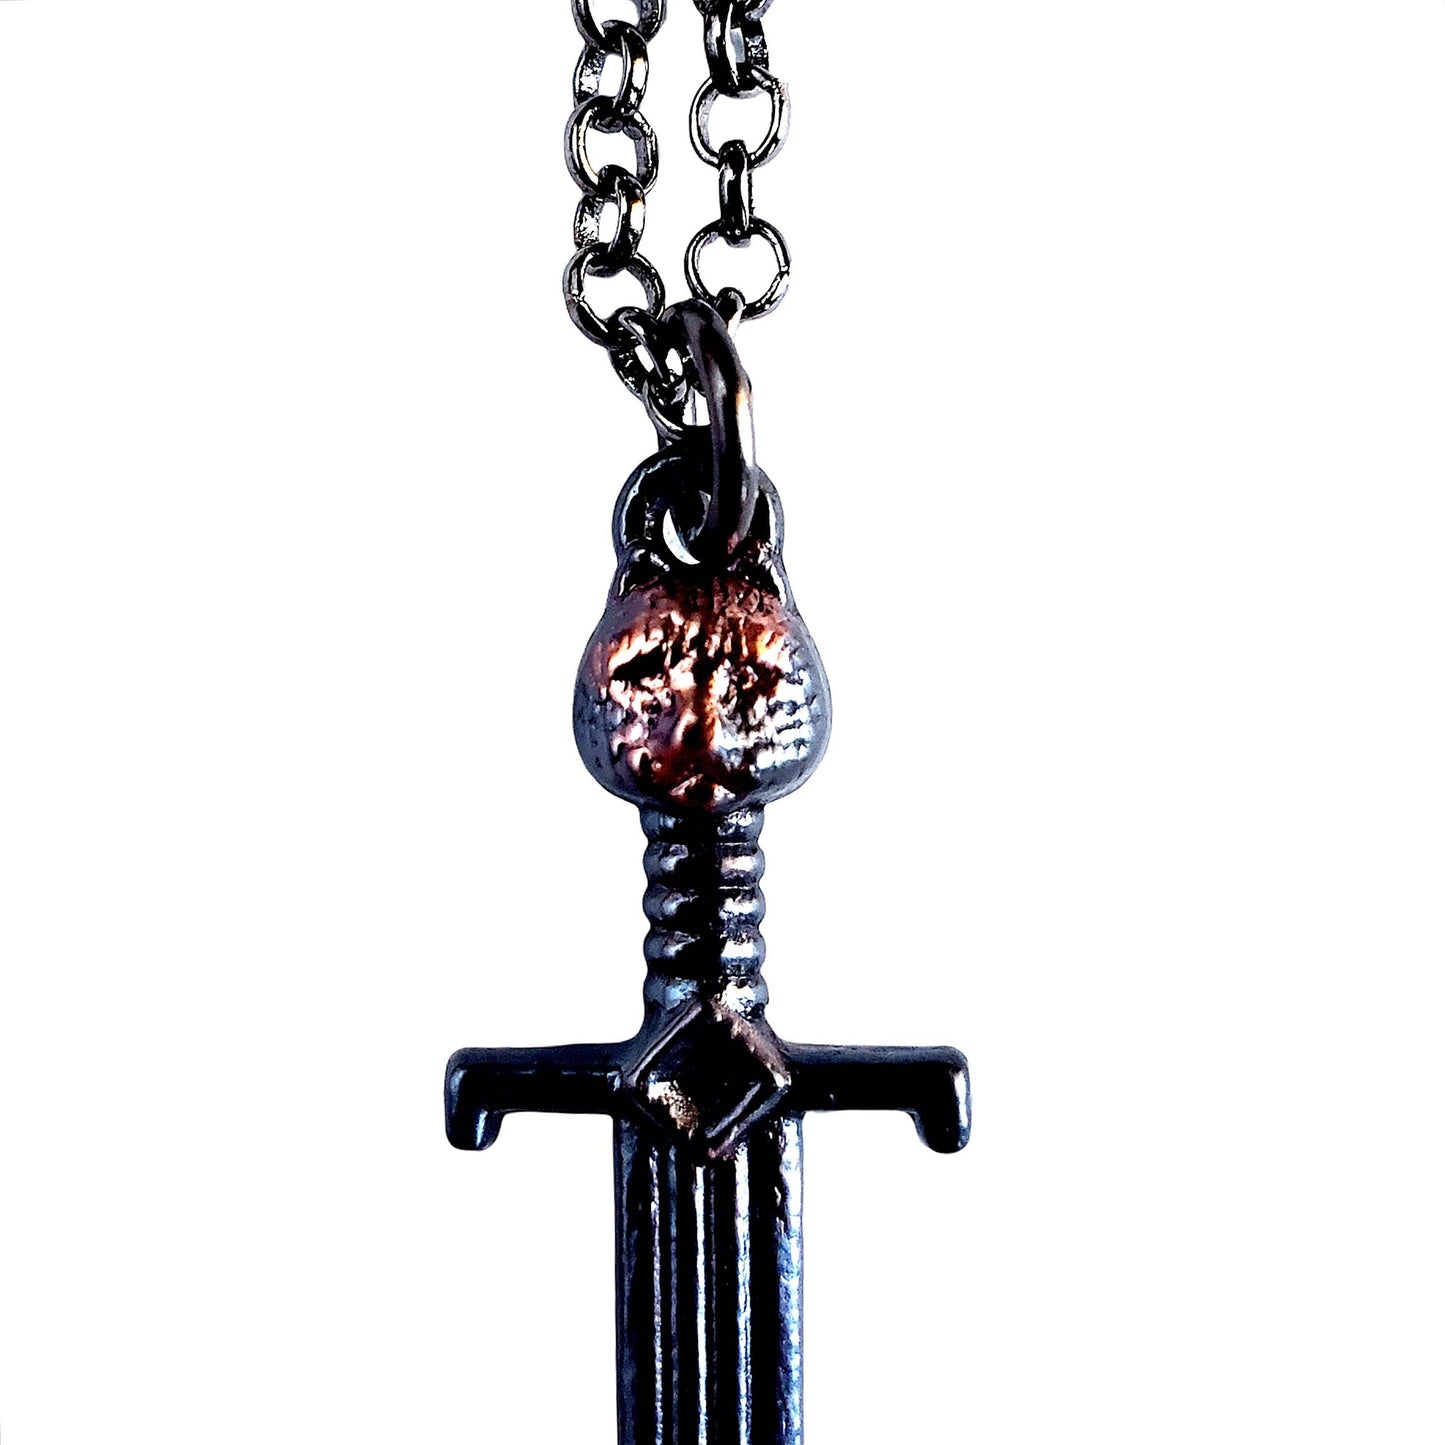 Doubled Edged Sword Necklace - Gunmetal